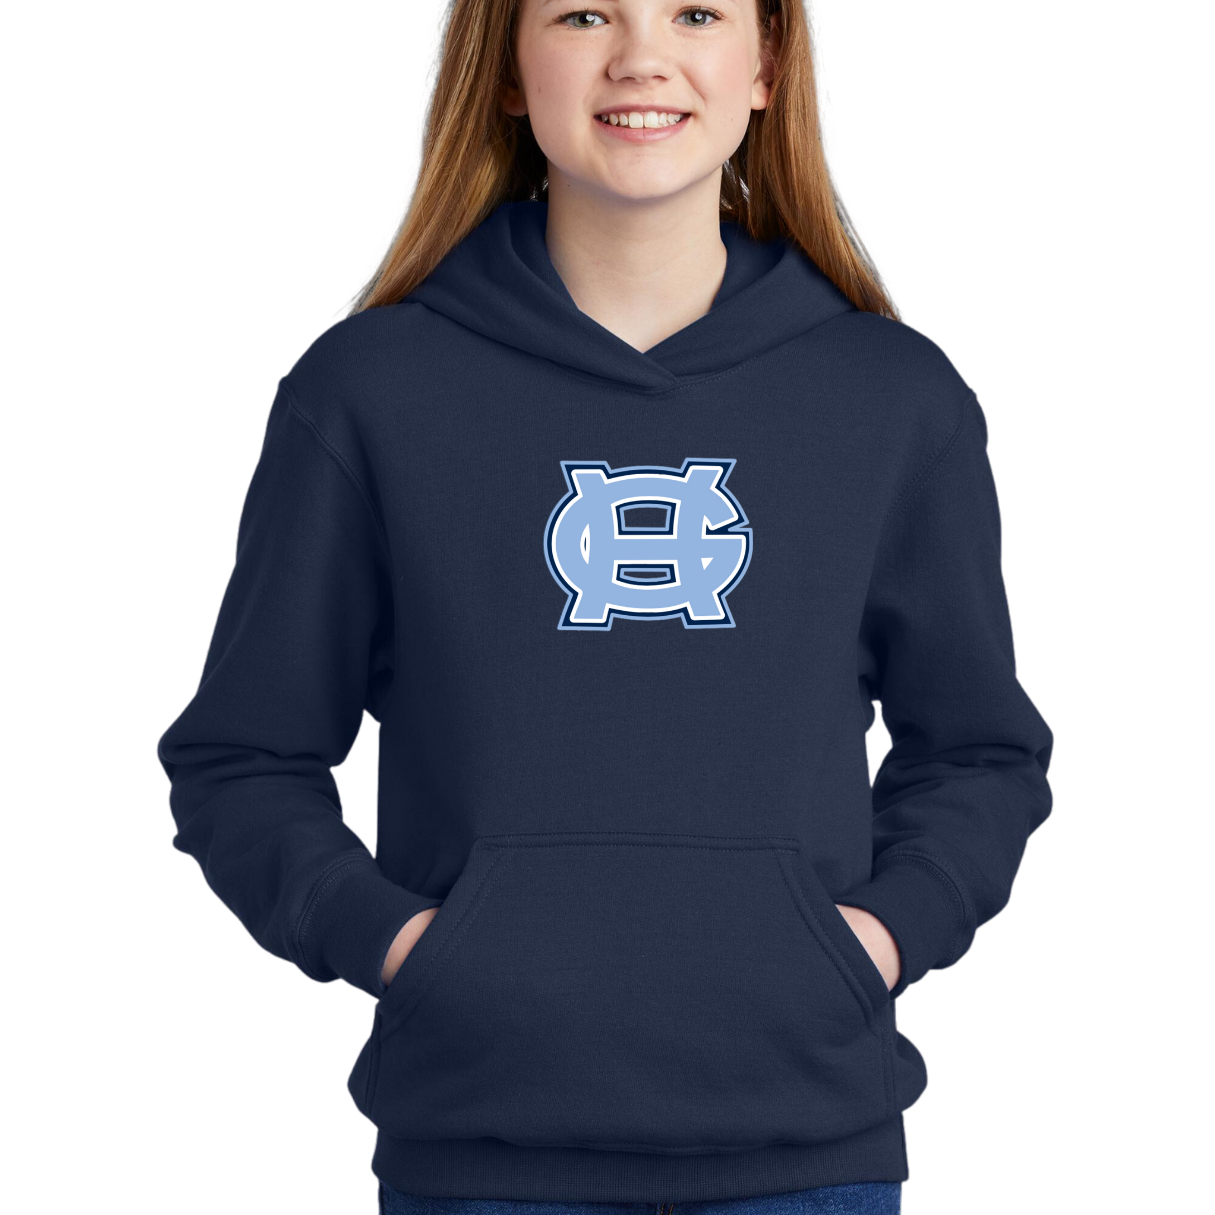 Classic GH Hooded Sweatshirt - Adult and Youth